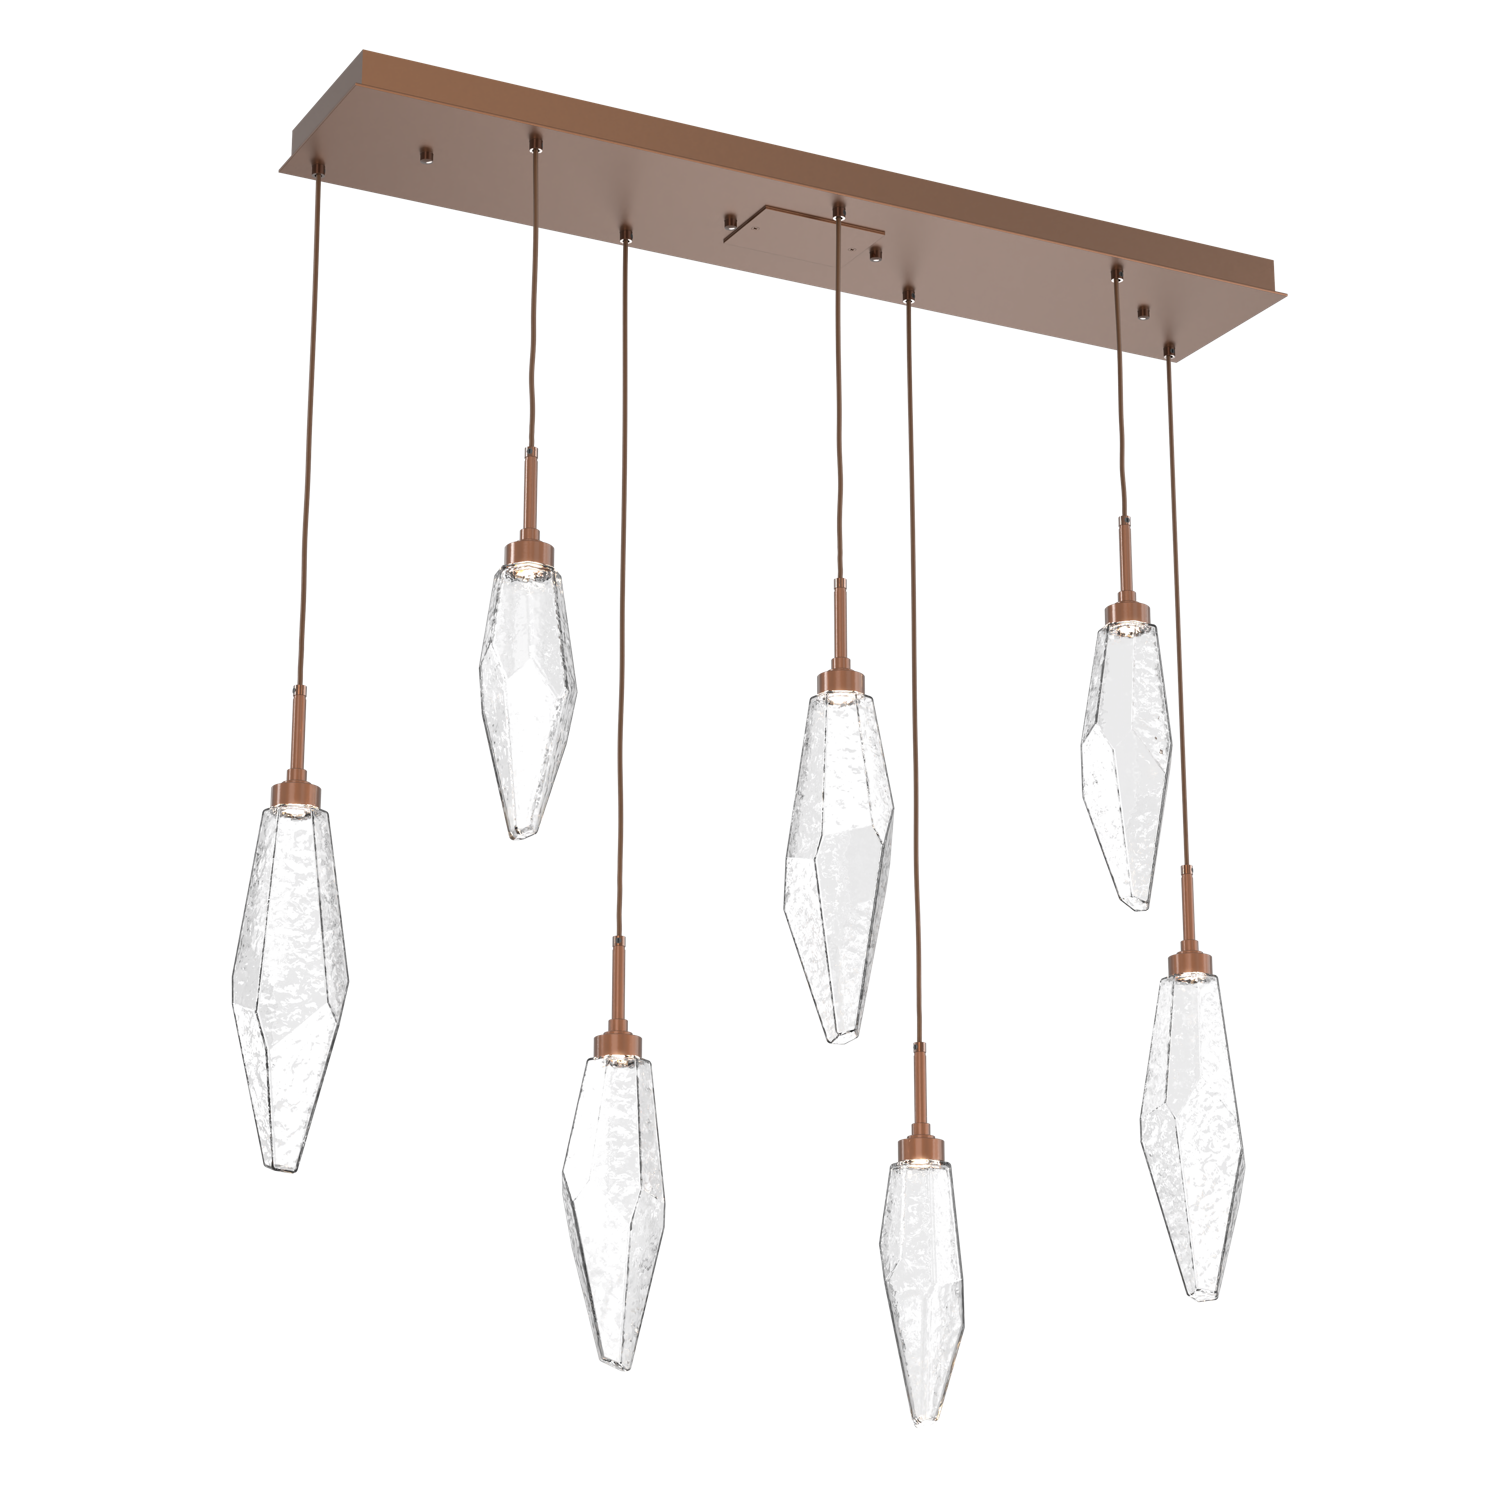 PLB0050-07-BB-CC-Hammerton-Studio-Rock-Crystal-7-light-linear-pendant-chandelier-with-burnished-bronze-finish-and-clear-glass-shades-and-LED-lamping